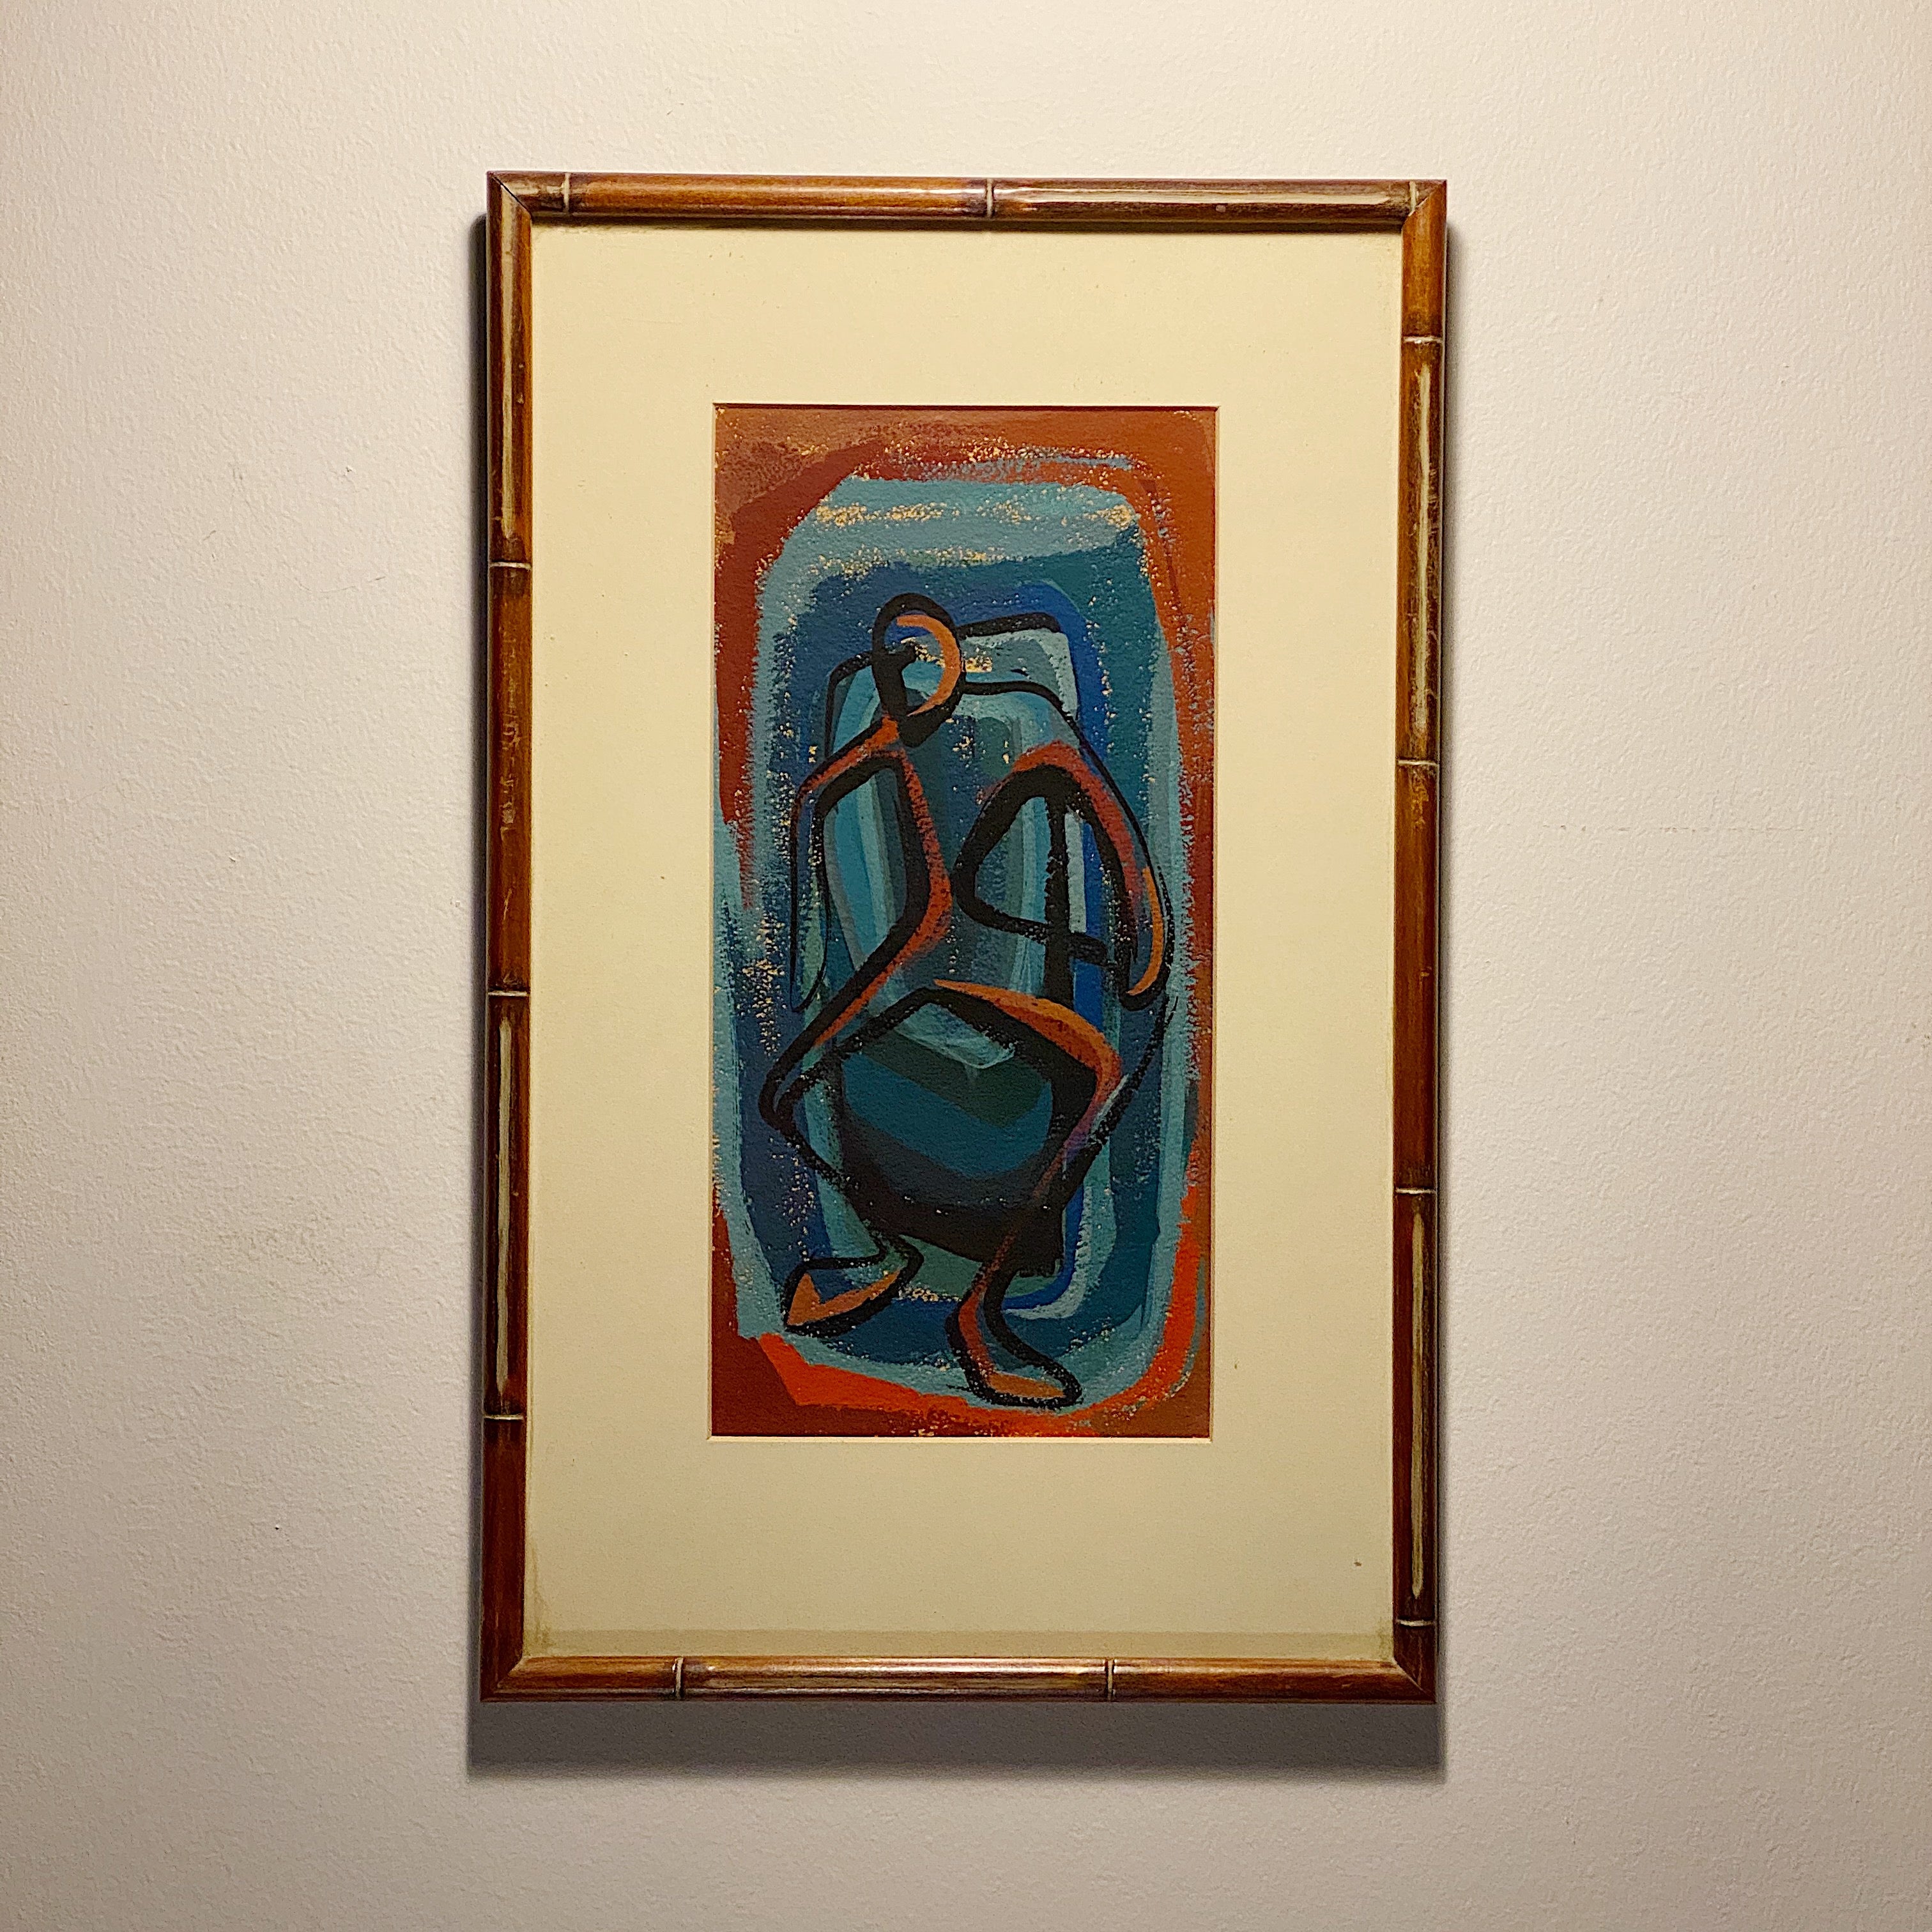 1950s Mod Painting of Abstract Figure - Surreal Artwork - Rare Modernist Paintings on Paper - Mystery Artist - Bamboo Frame - Wisconsin